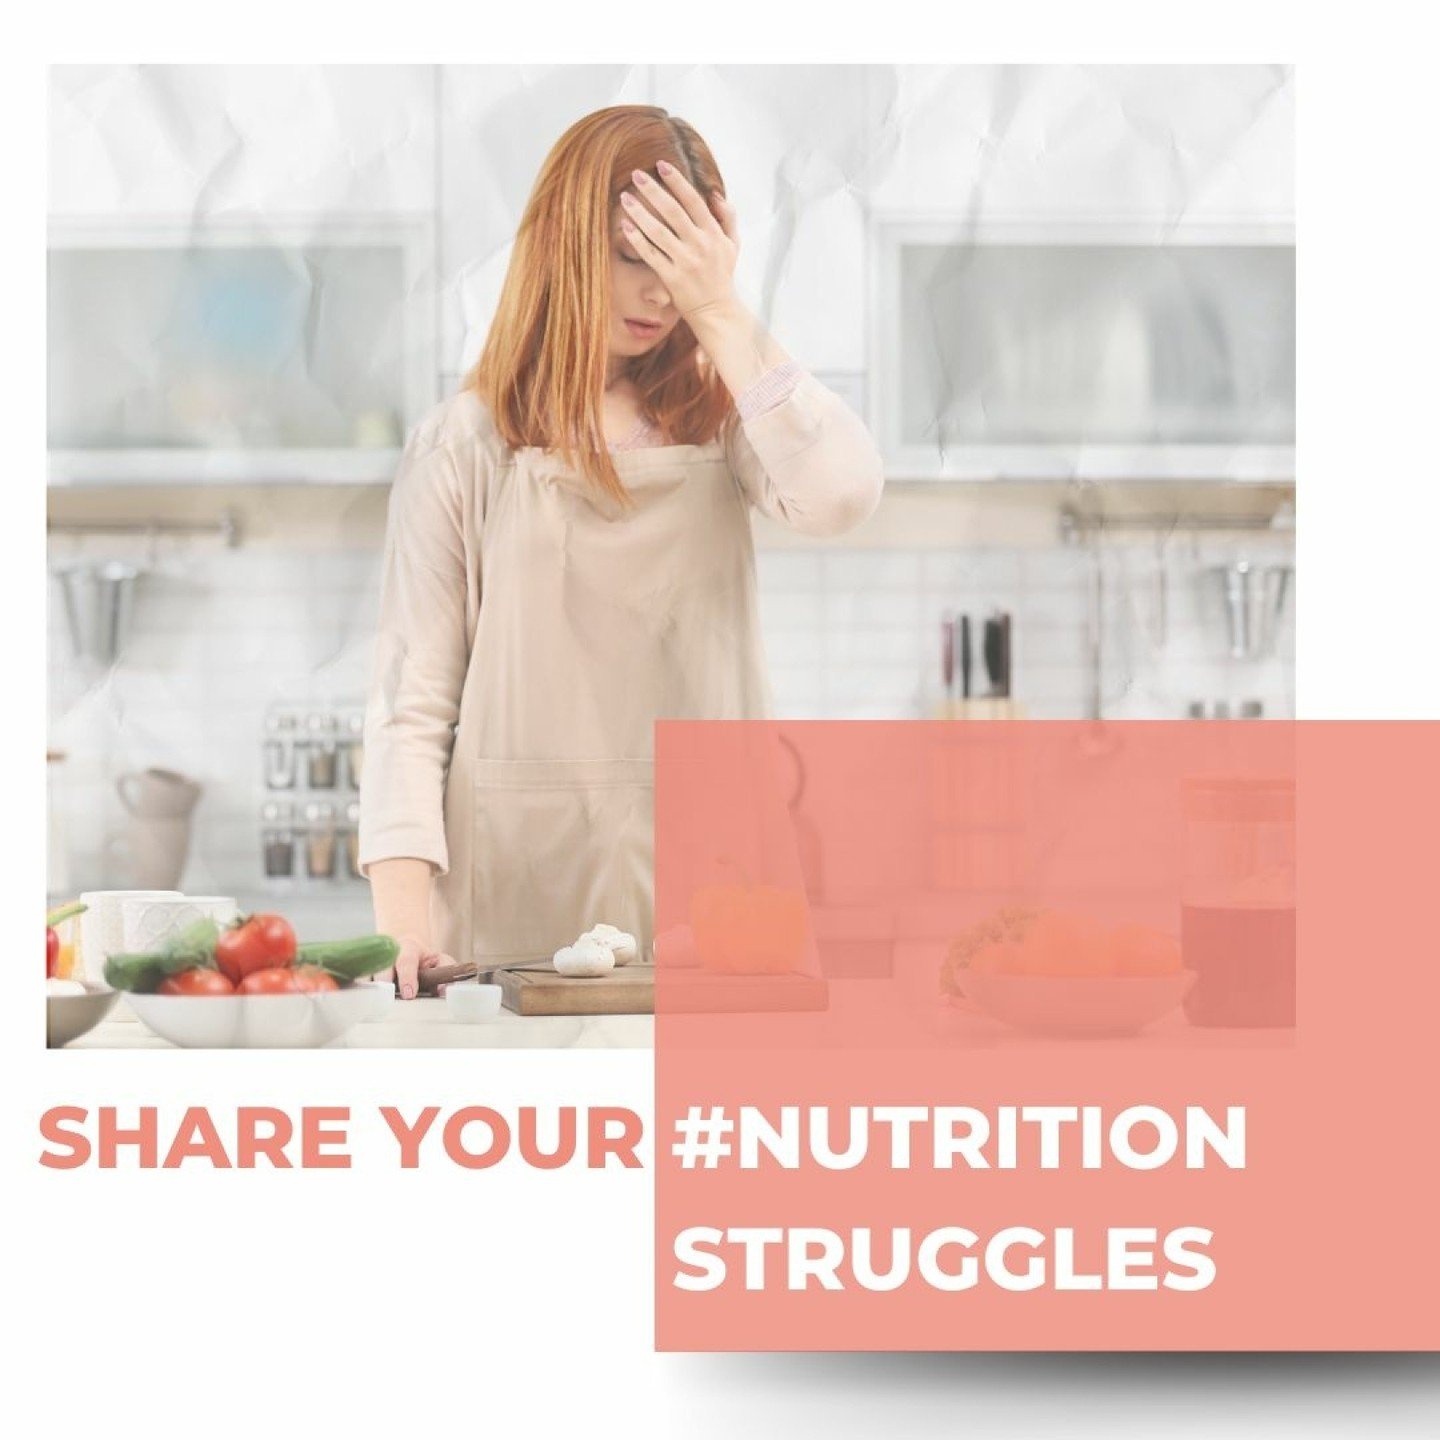 🛒Grocery shopping, meal prep, label reading &ndash; the struggle is real! 

🥗What's the most challenging part of maintaining a balanced diet for you? 

😌Share your experiences! 

#HealthyEating #NutritionChallenges #RealWorldNutrition #NutritionSt